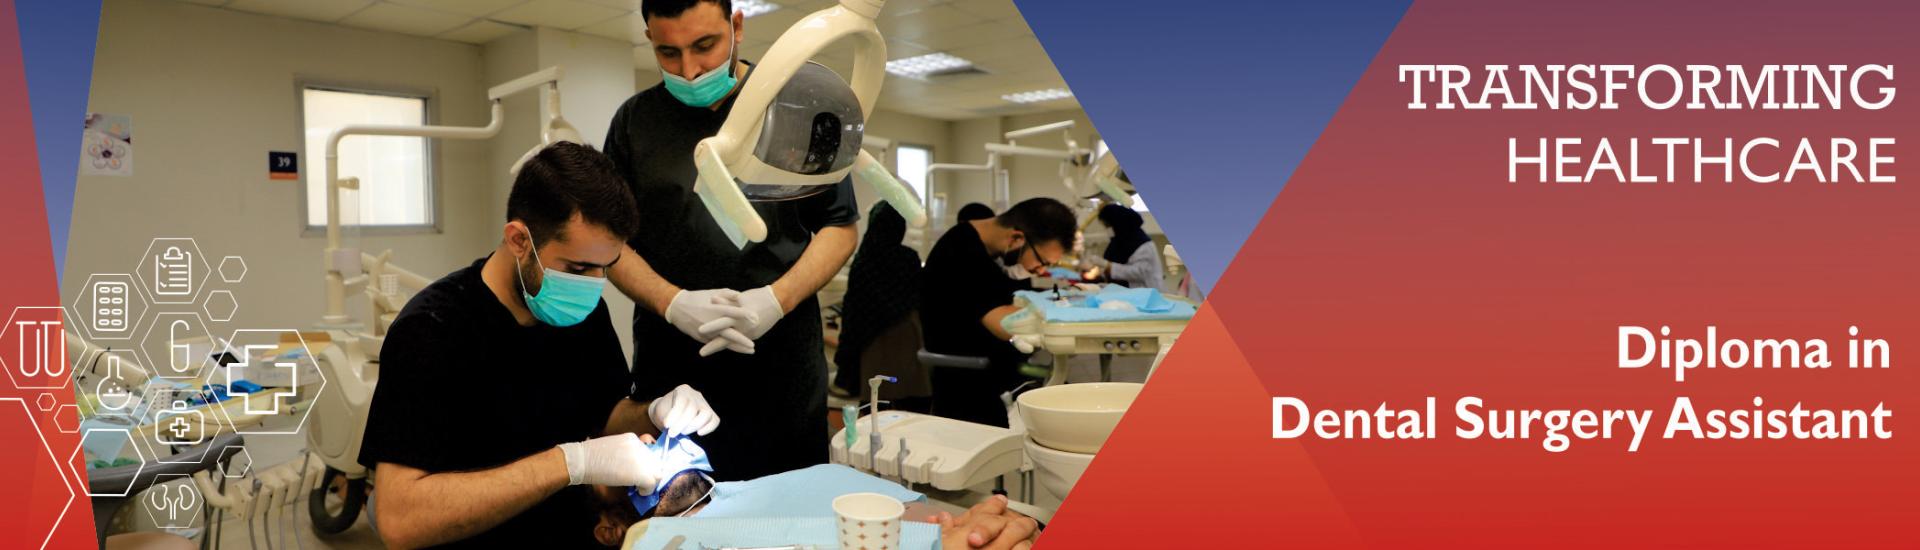 Diploma in Dental Surgery Assistant